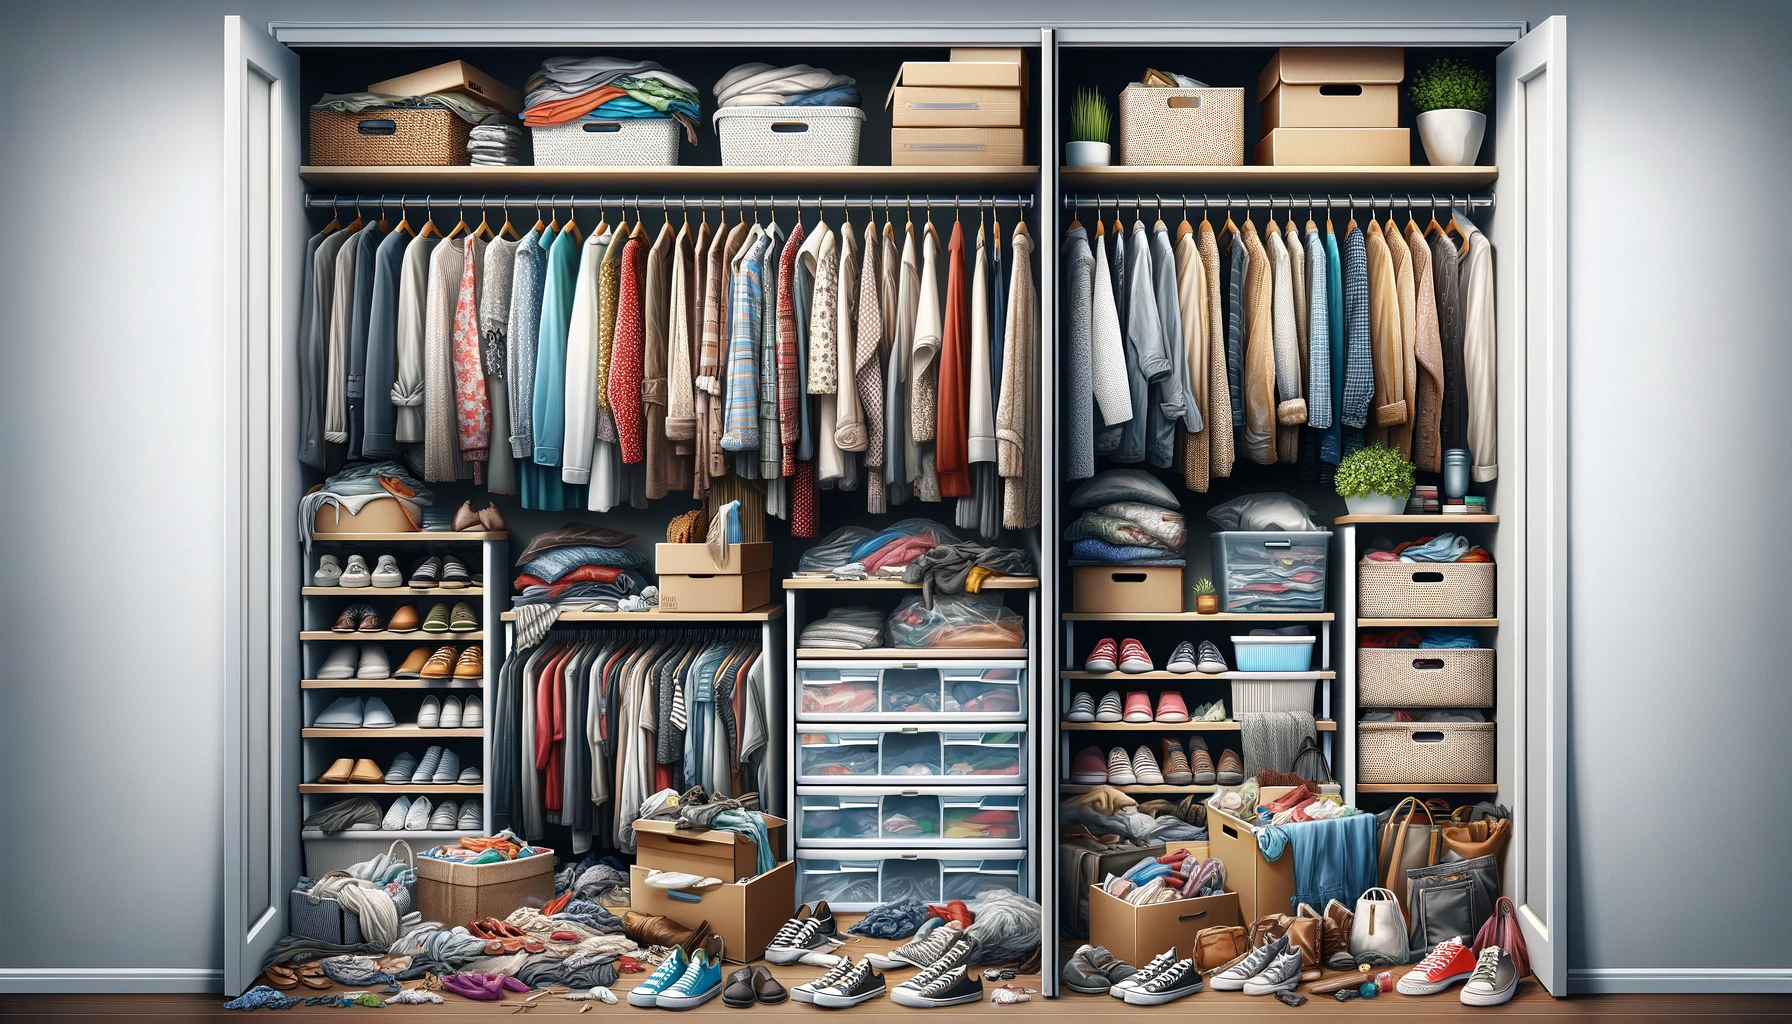 What Are the Best Ways to Declutter a Closet?